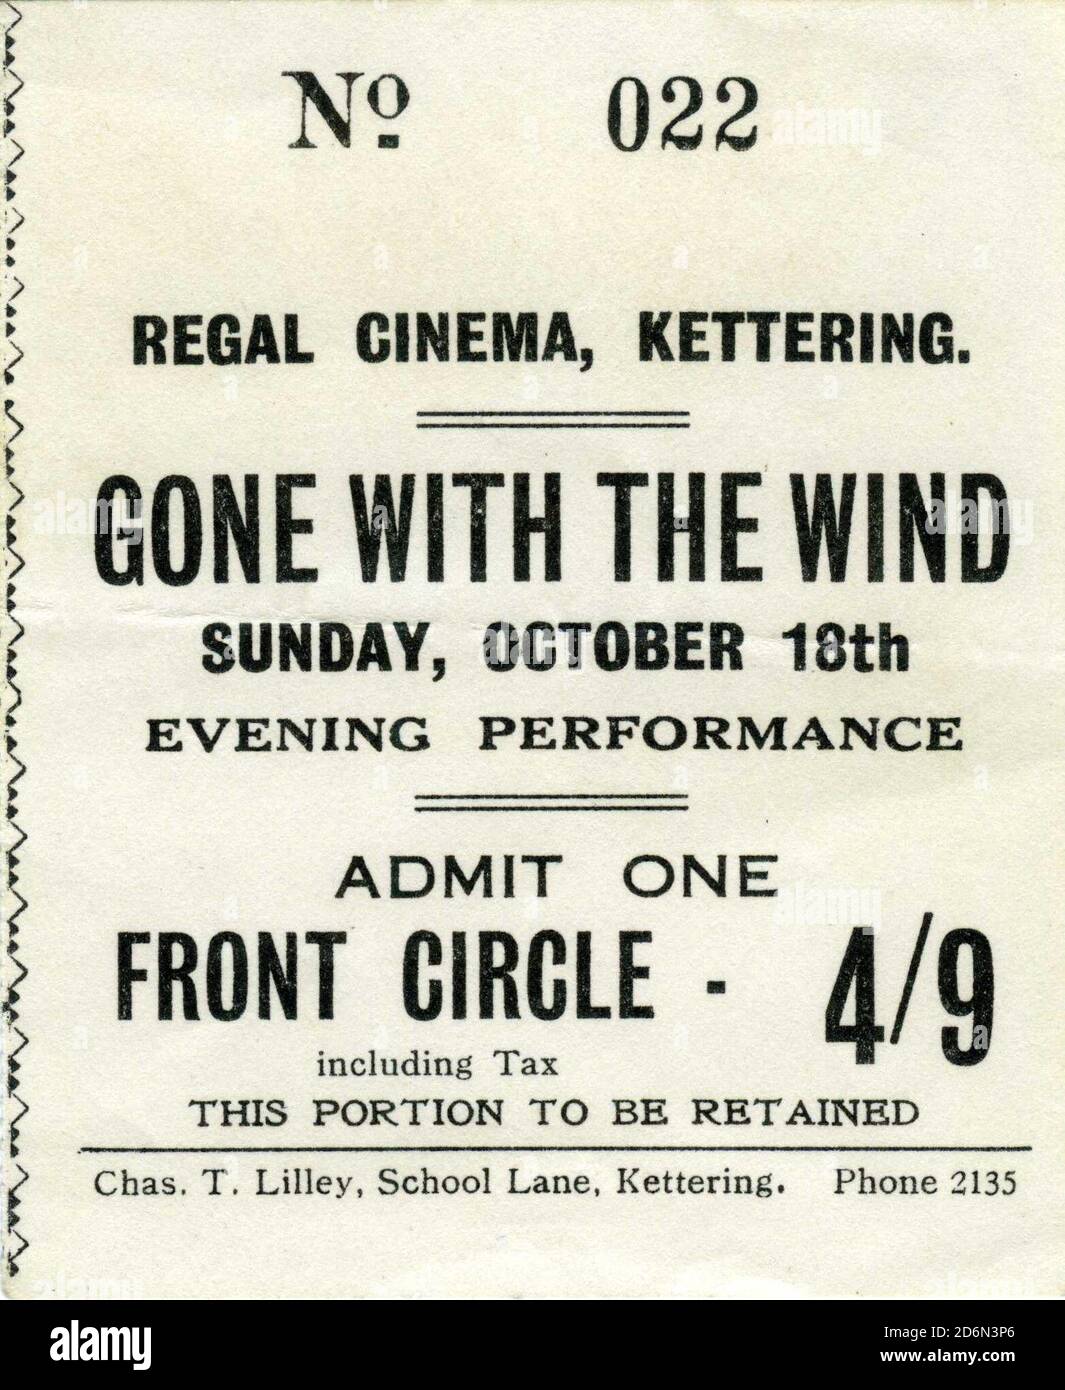 British cinema ticket stub from the Regal Cinema in Kettering for the Sunday October 18th 1942 performance of GONE WITH THE WIND 1939 director VICTOR FLEMING novel Margaret Mitchell music Max Steiner costumes Walter Plunkett producer David O. Selznick Selznick International Pictures / Metro Goldwyn Mayer Stock Photo